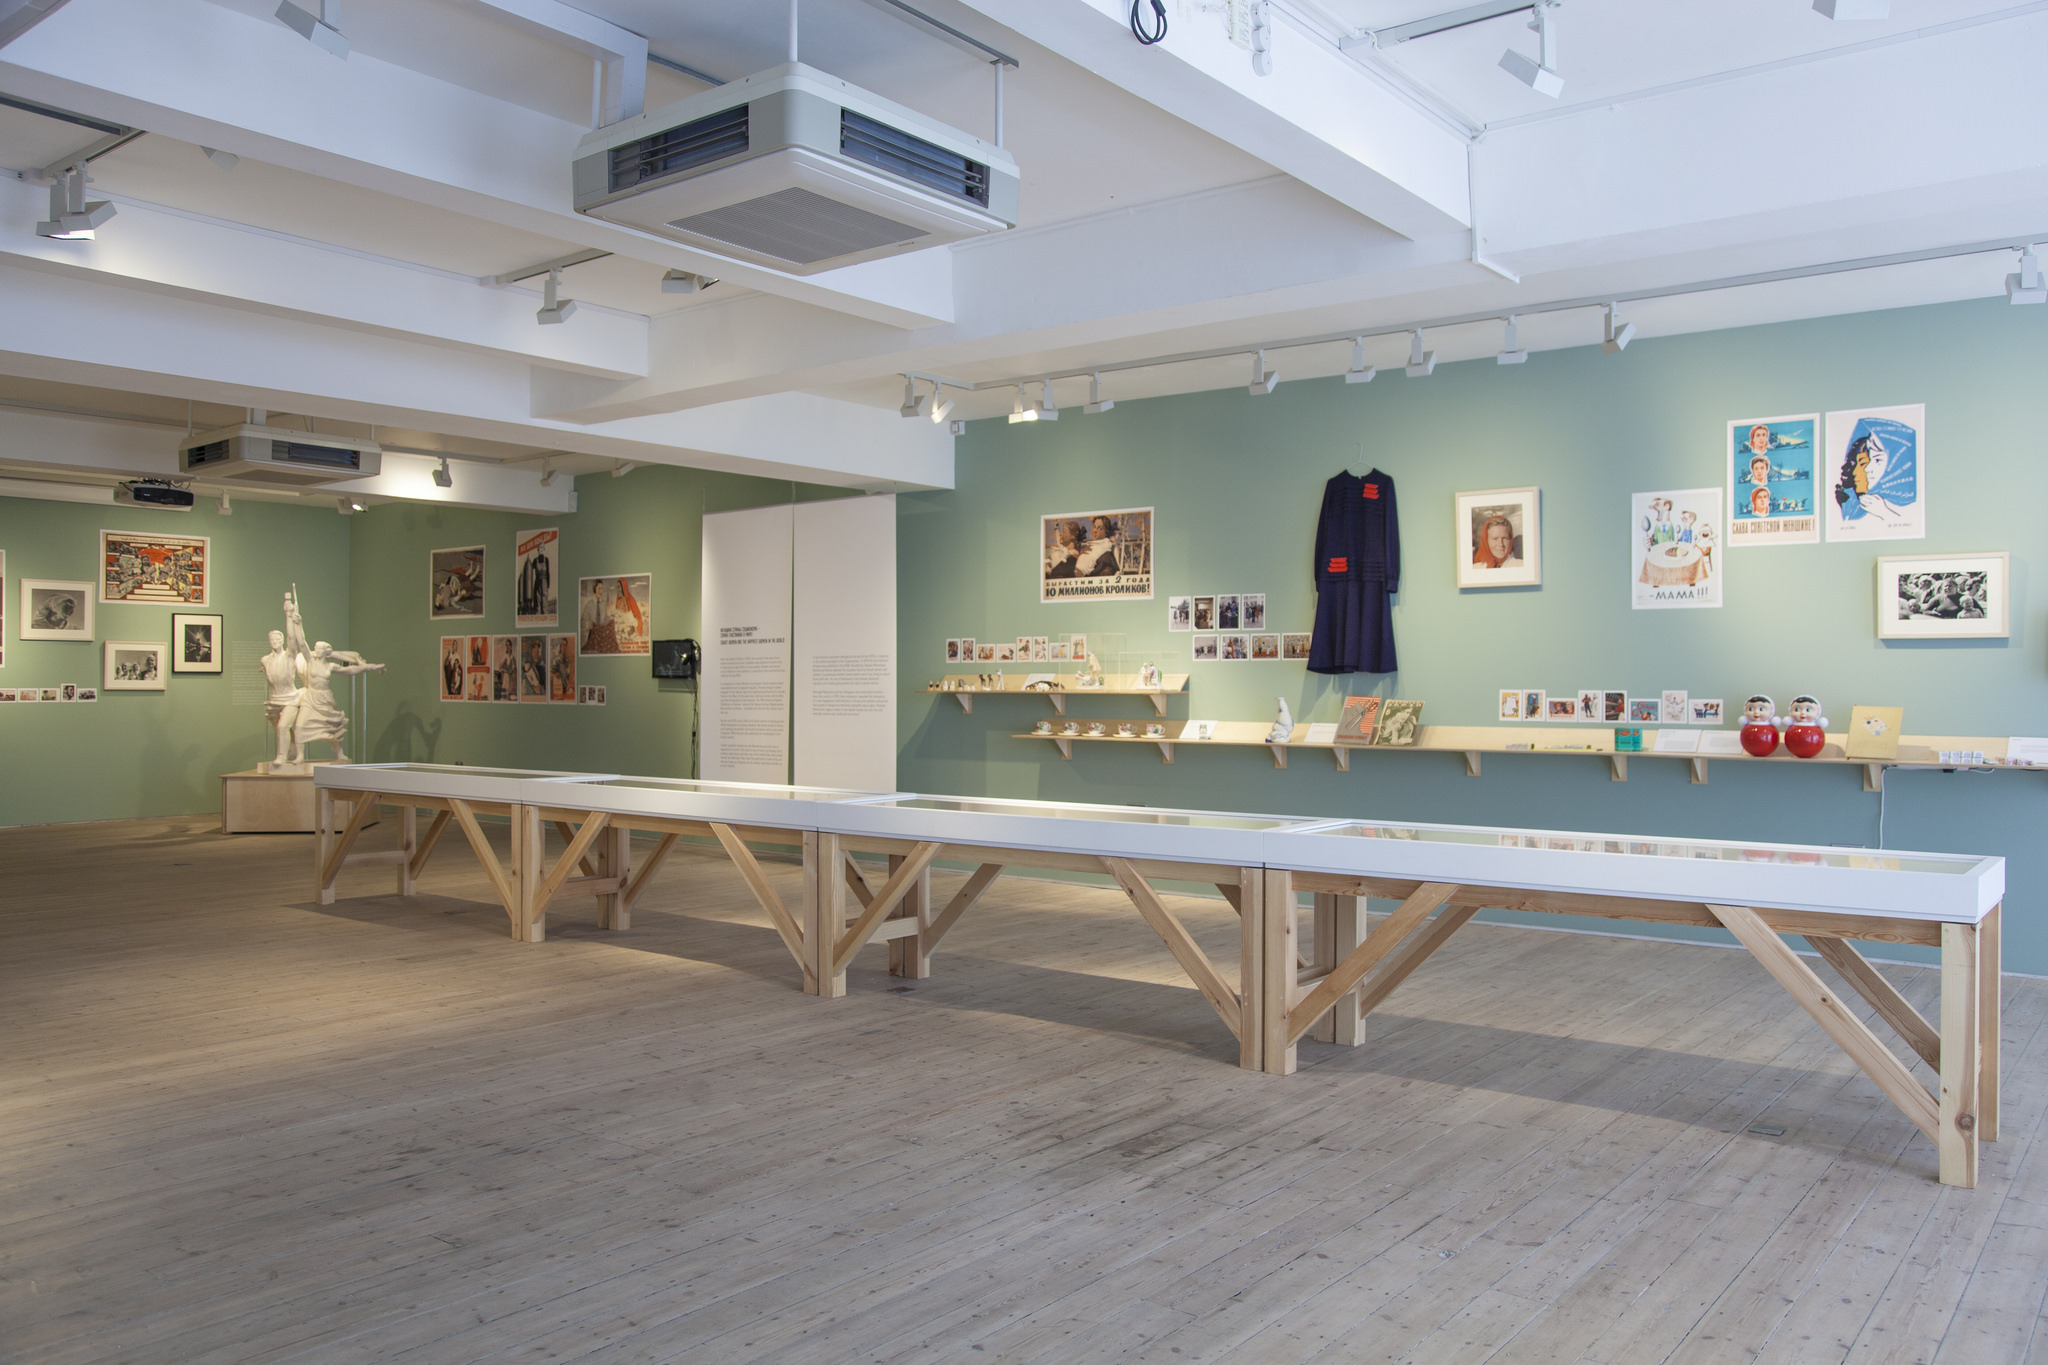  Superwoman: 'Work, Build and Don't Whine' Exhibition 